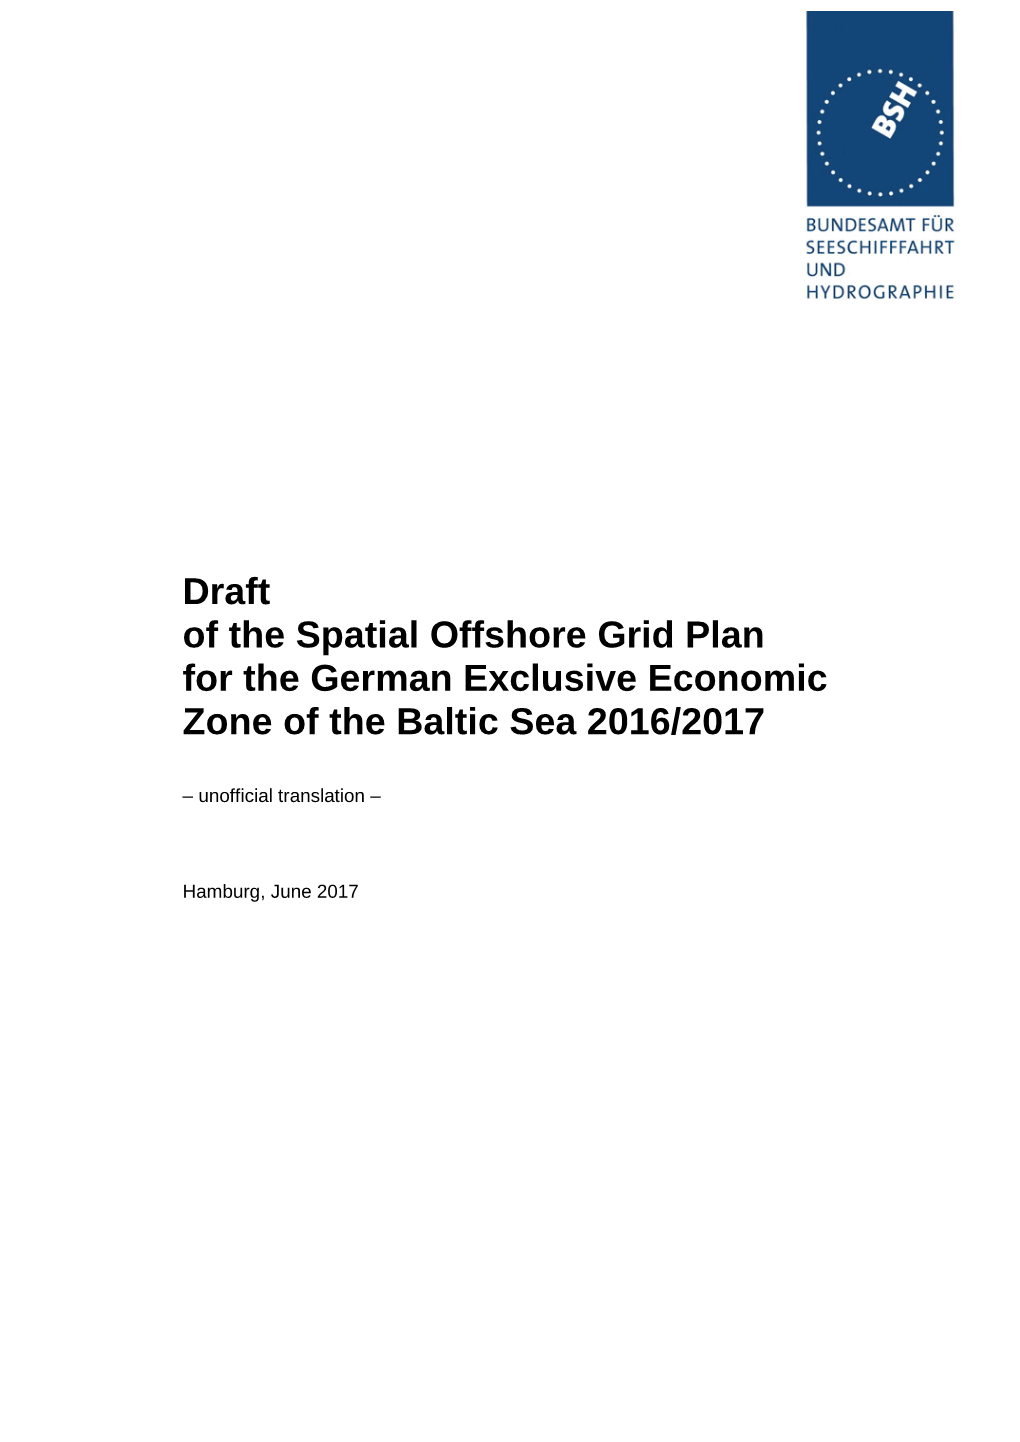 Draft of the Spatial Offshore Grid Plan for the German Exclusive Economic Zone of the Baltic Sea 2016/2017